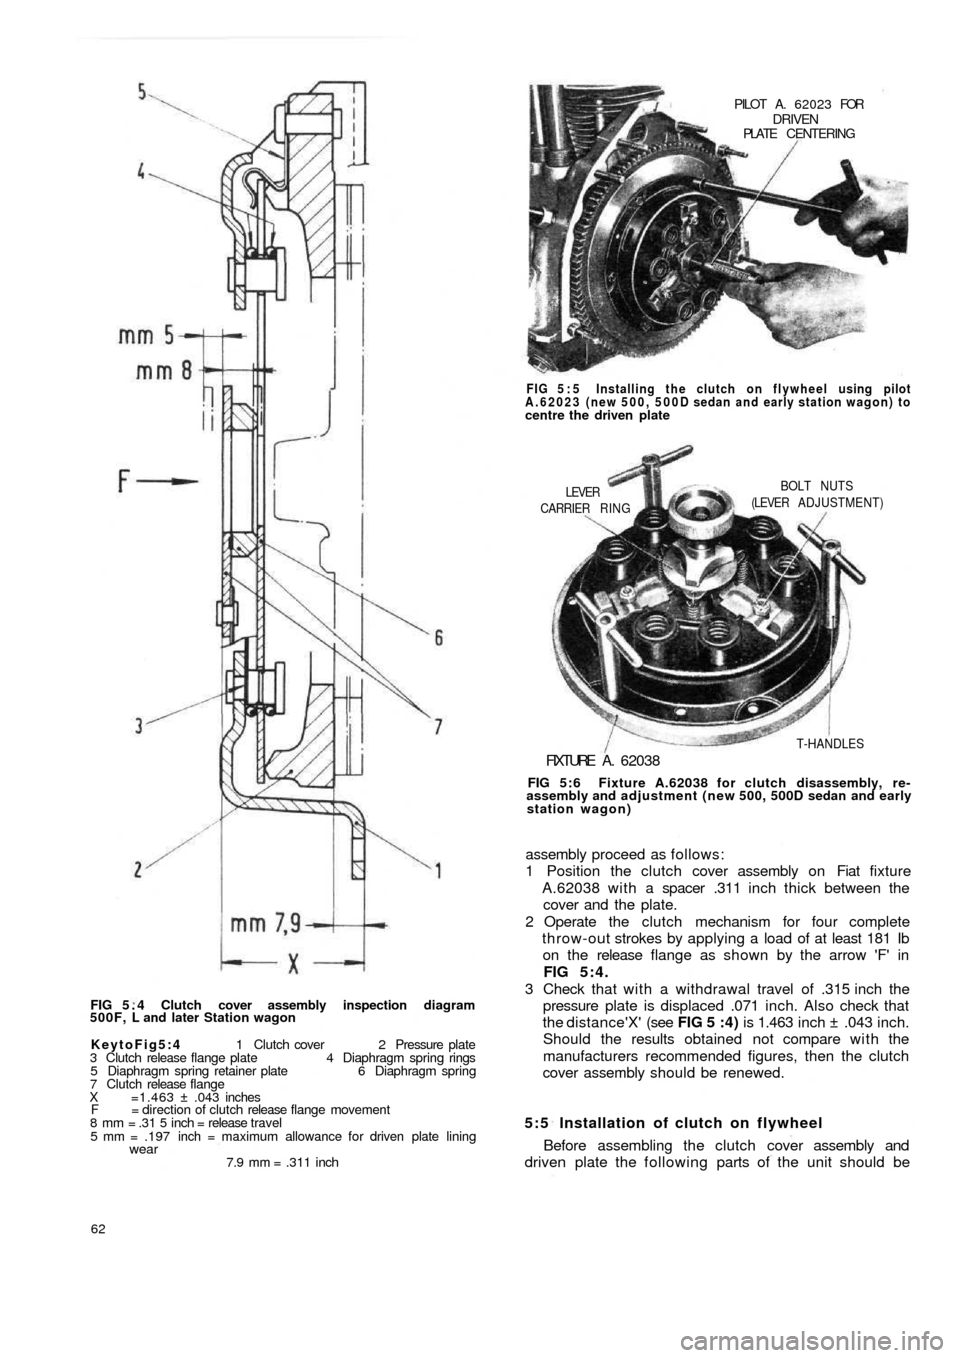 FIAT 500 1971 1.G Repair Manual FIG 5 . 4  Clutch cover assembly inspection diagram
500F, L and later Station wagon
KeytoFig5:4 1 Clutch cover 2 Pressure plate
3 Clutch release flange plate 4 Diaphragm spring rings
5 Diaphragm sprin